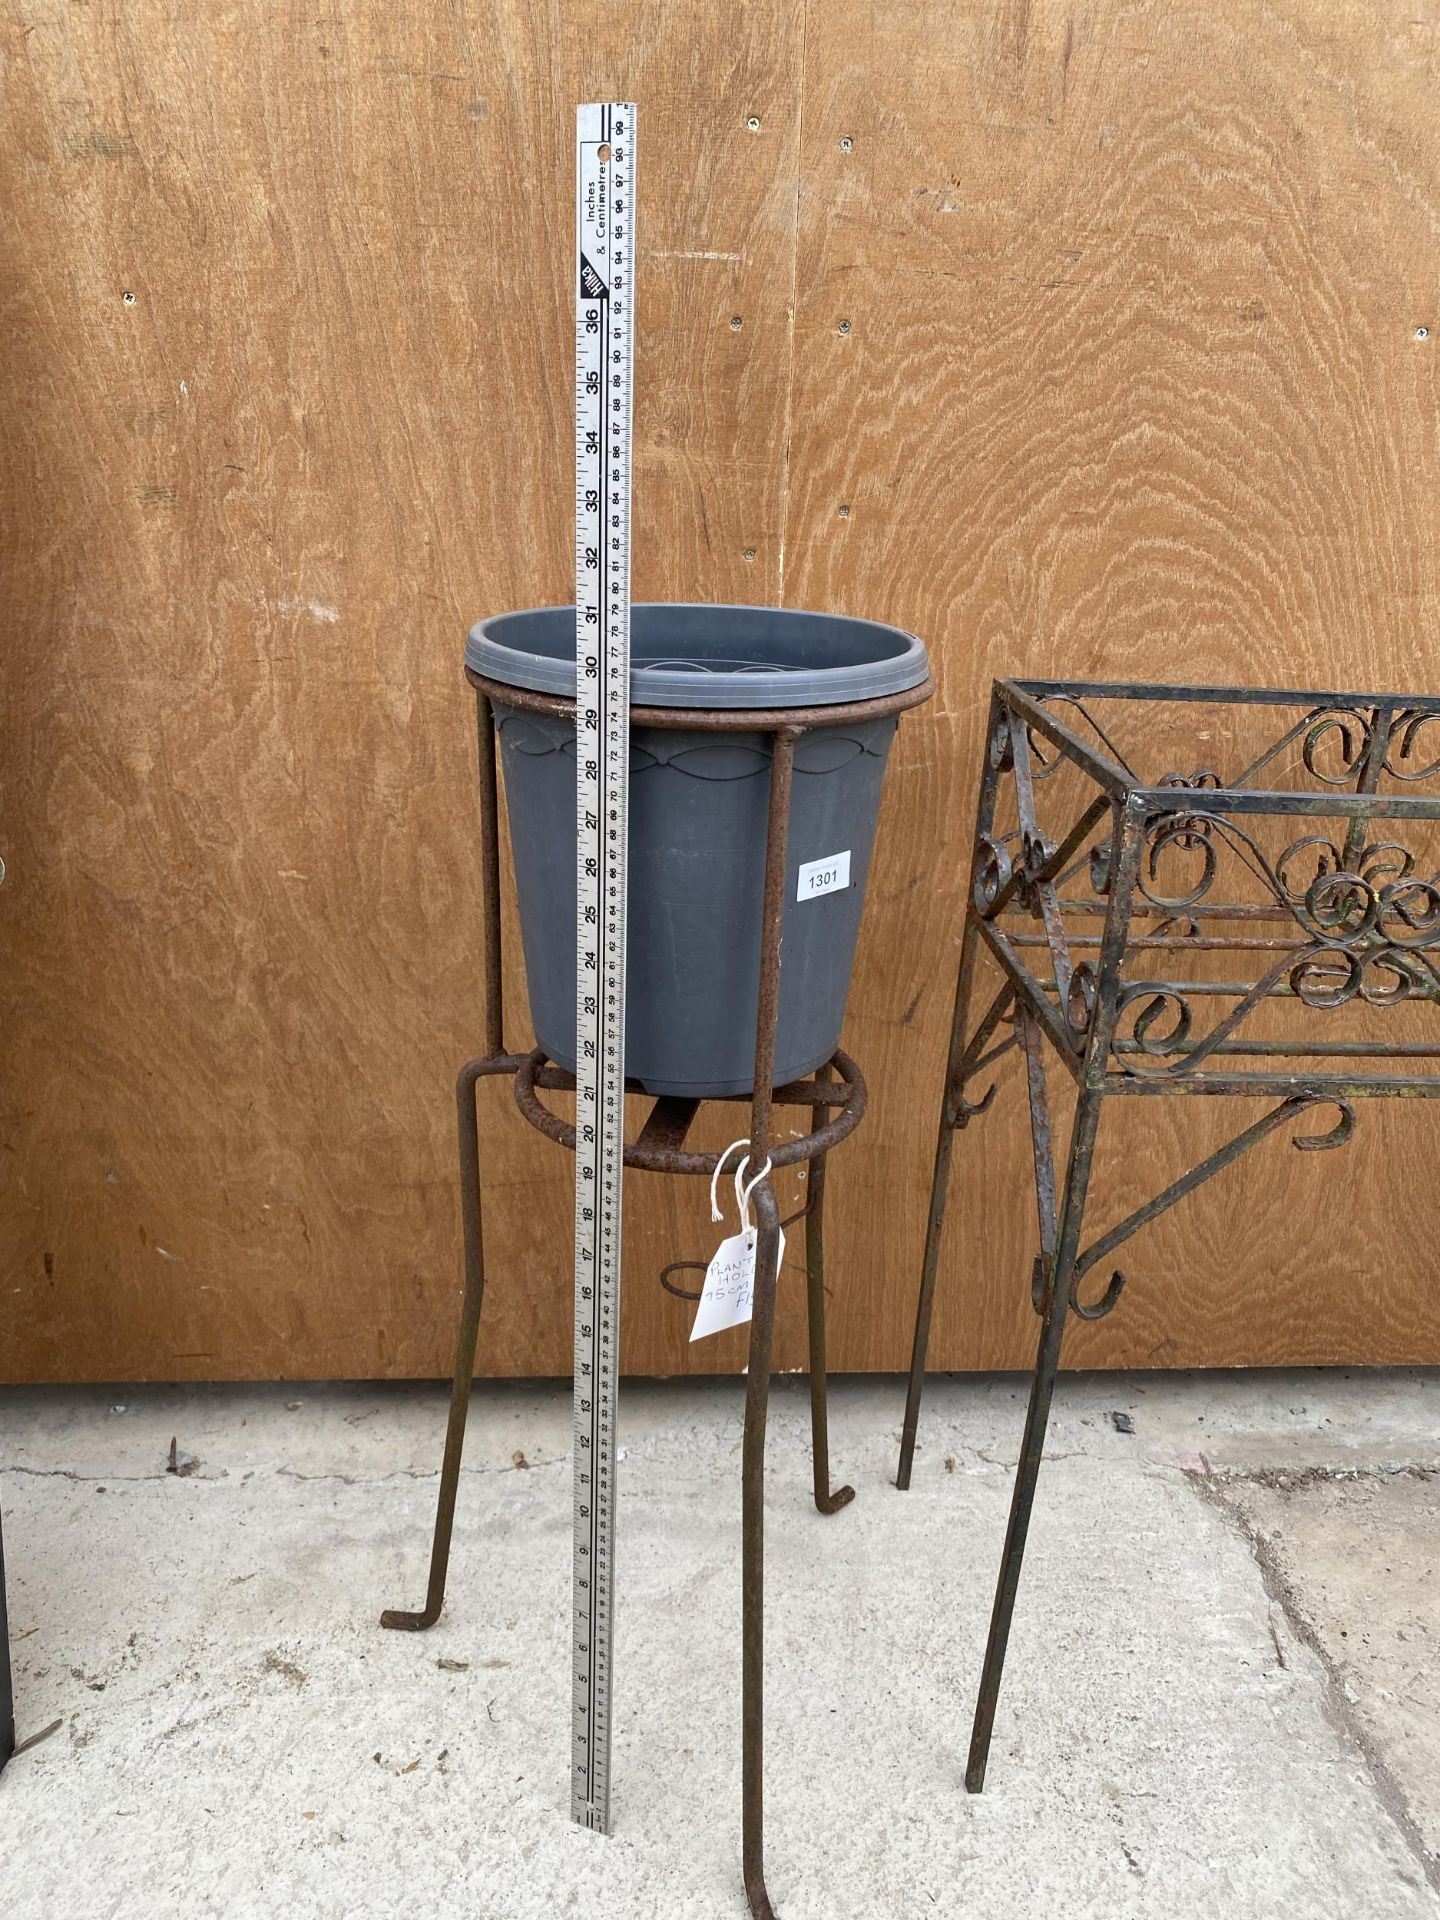 A ROUND WROUGHT IRON PLANT POT HOLDER (H:75CM) - Image 10 of 12